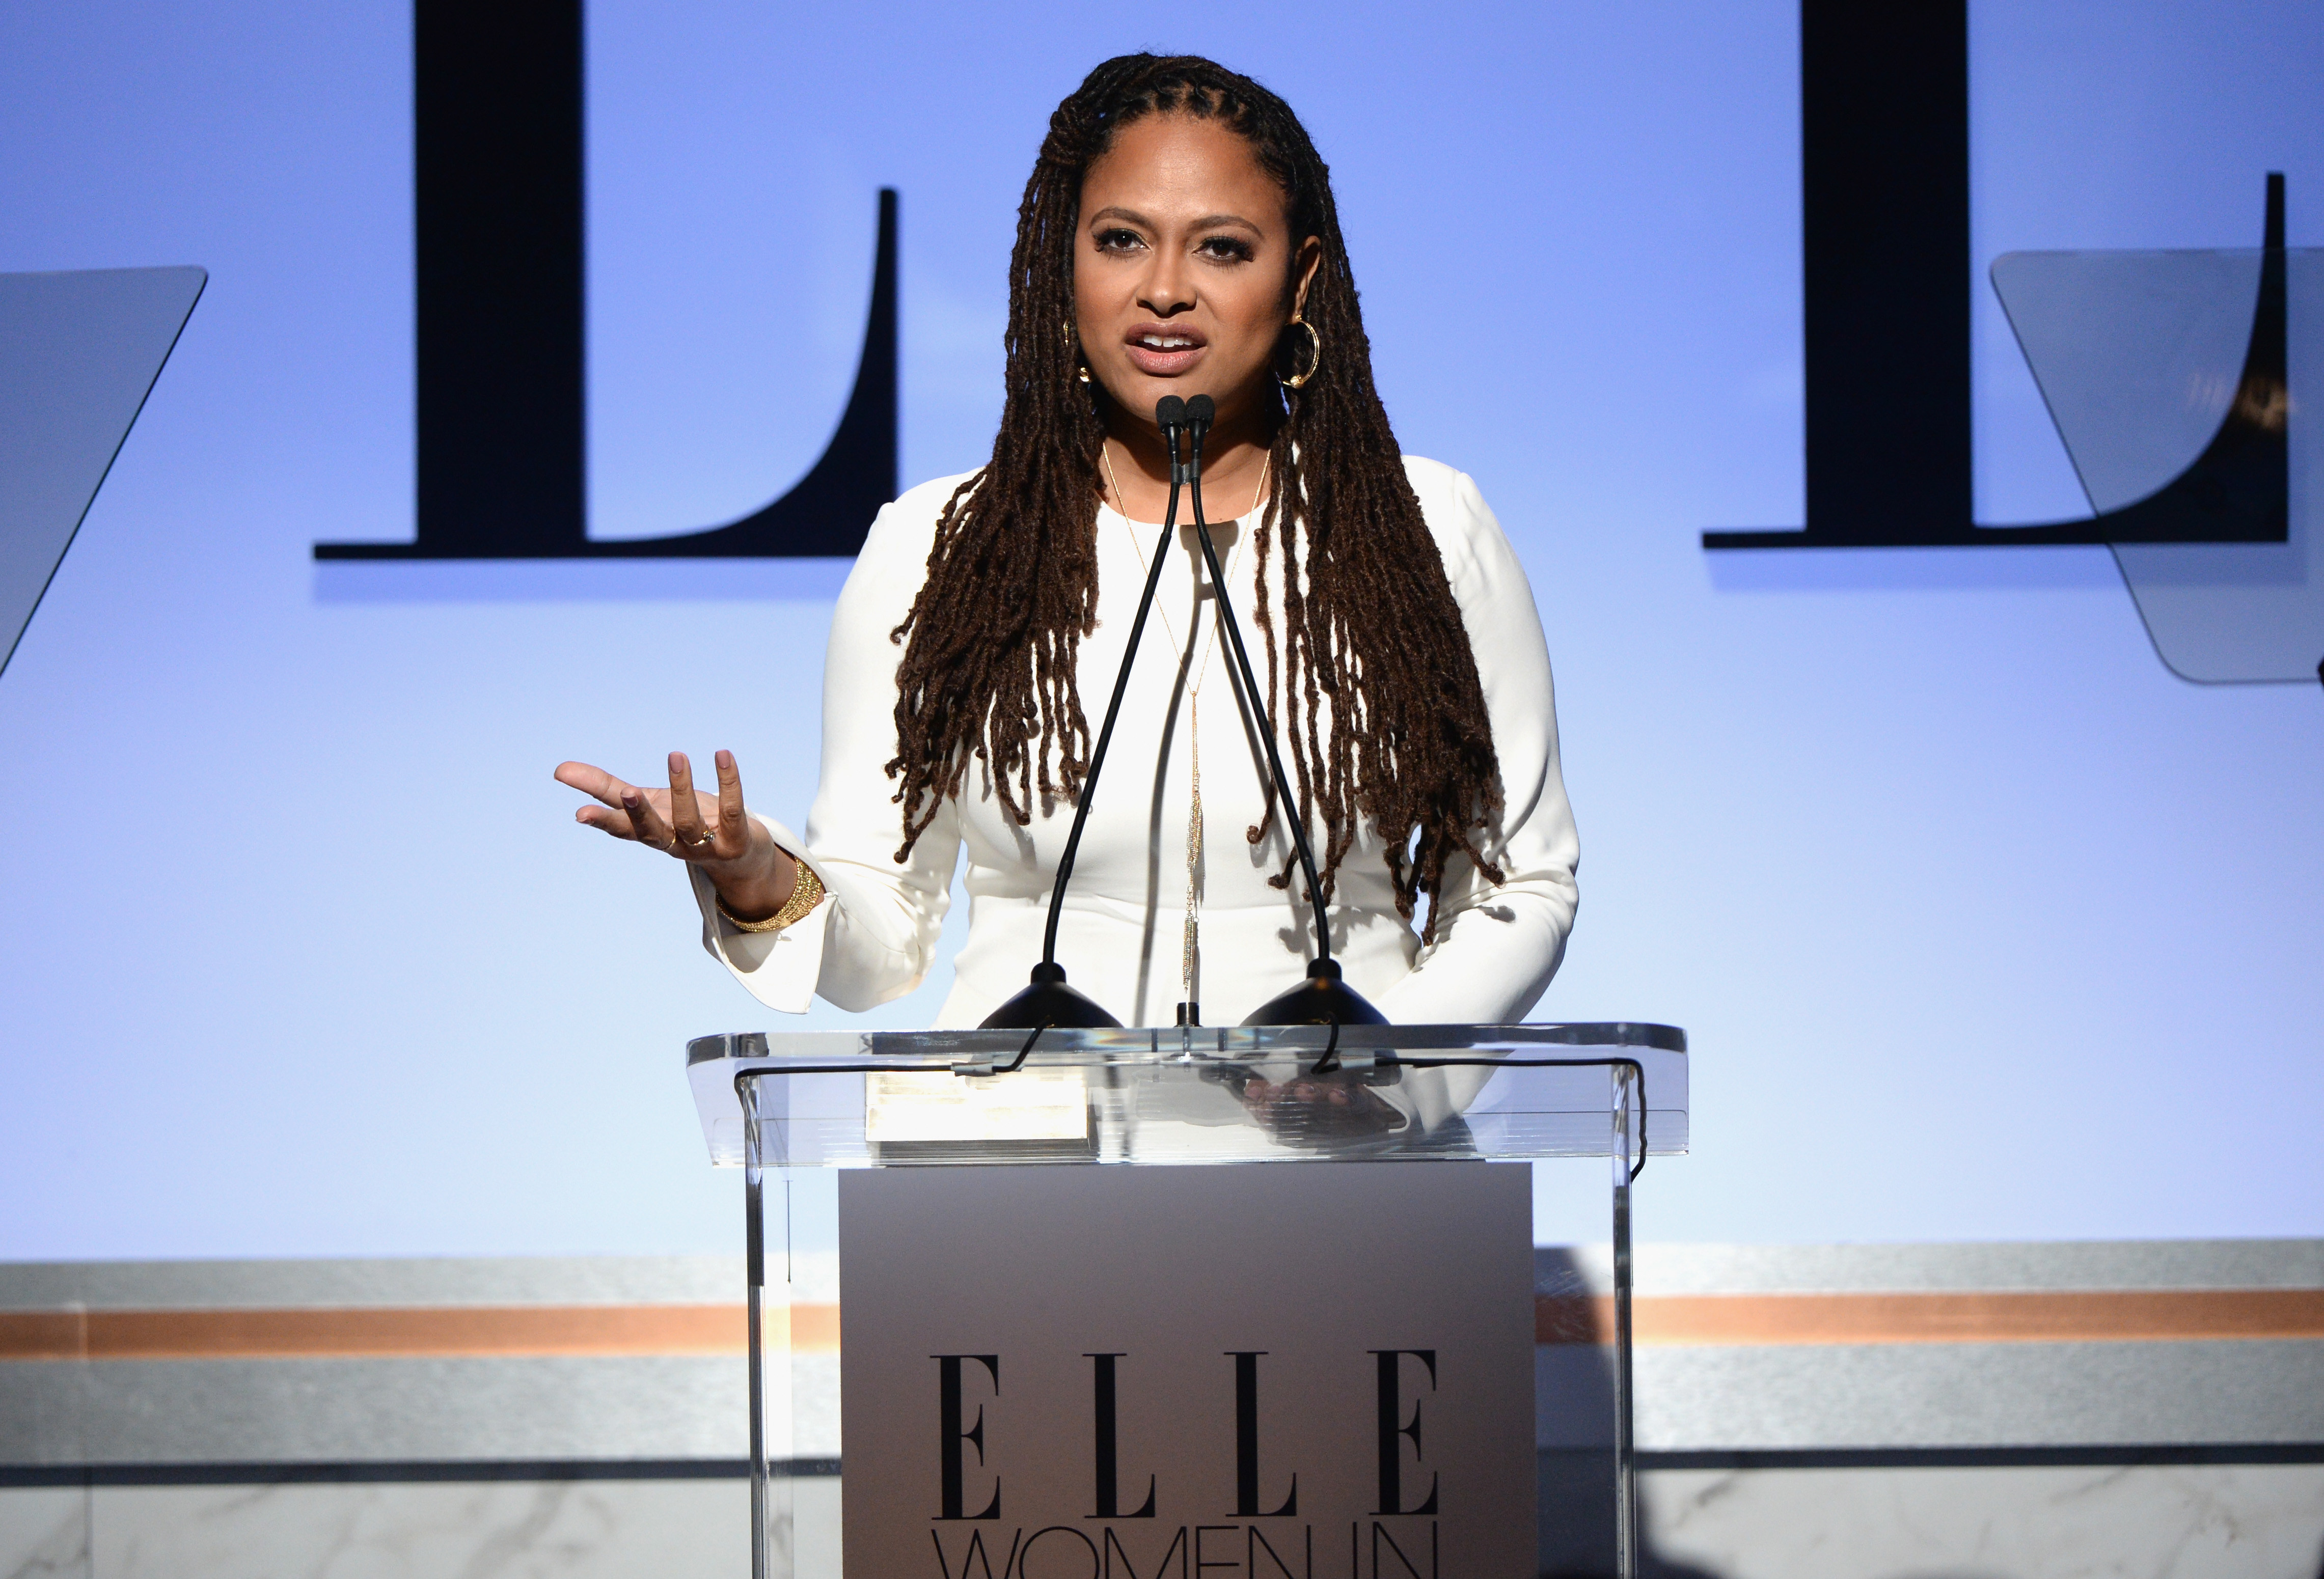 She is we better now. Доминик ДЮВЕРНЕЙ. Ava DUVERNAY. Ава ДЮВЕРНЕЙ на Оскаре. Ава why.